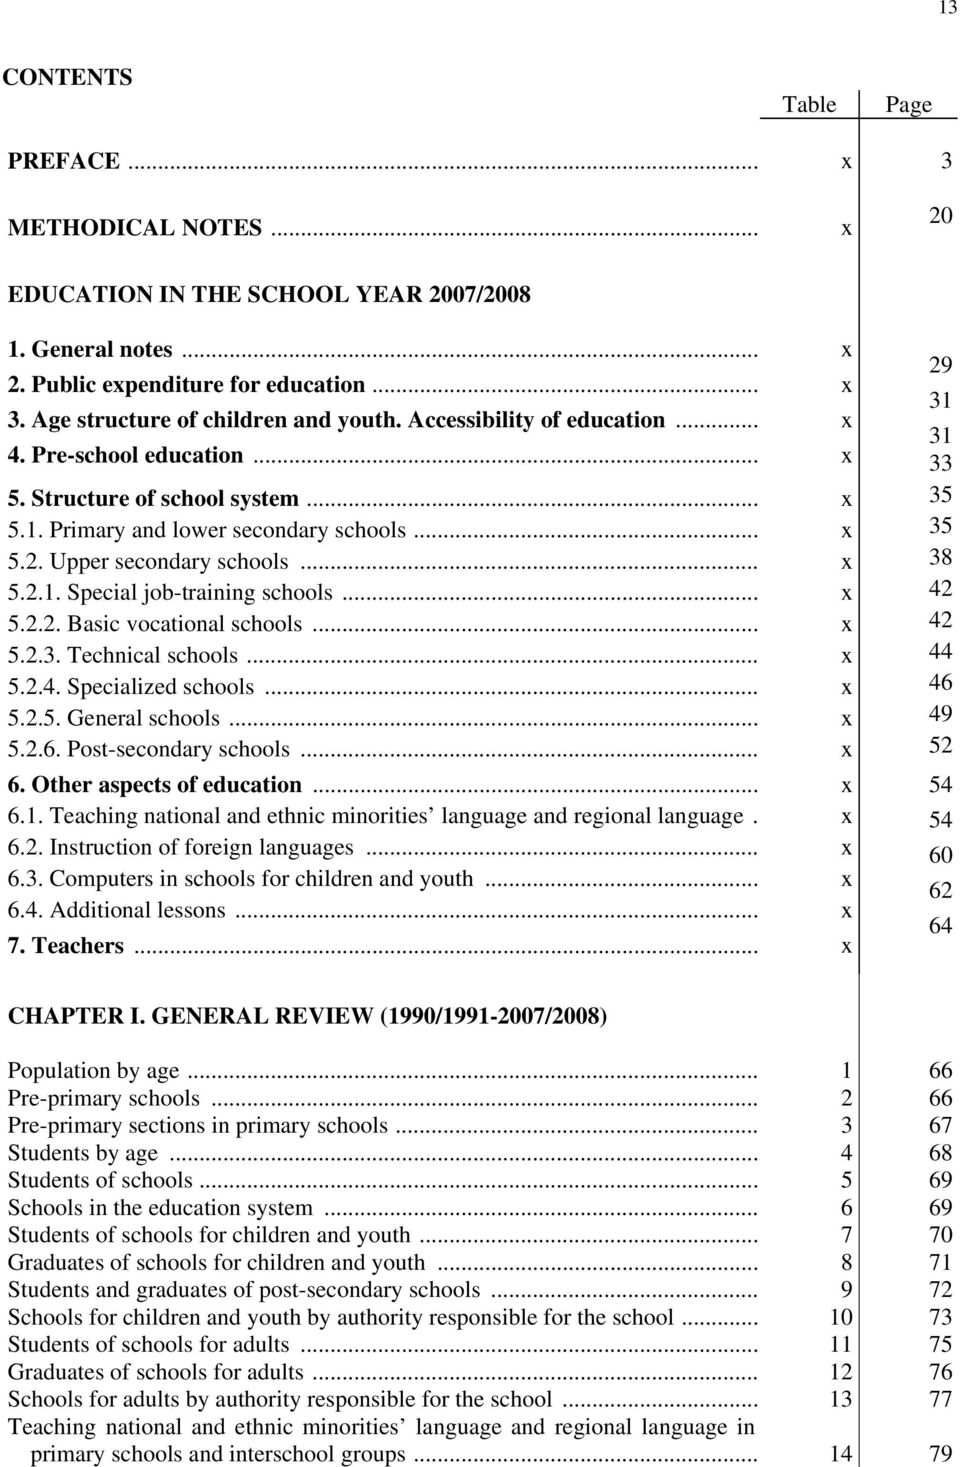 .. 5.2.2. Basic vocational schools... 5.2.3. Technical schools... 5.2.4. Specialized schools... 5.2.5. General schools... 5.2.6. Post-secondary schools... 6. Other aspects of education... 6.1.